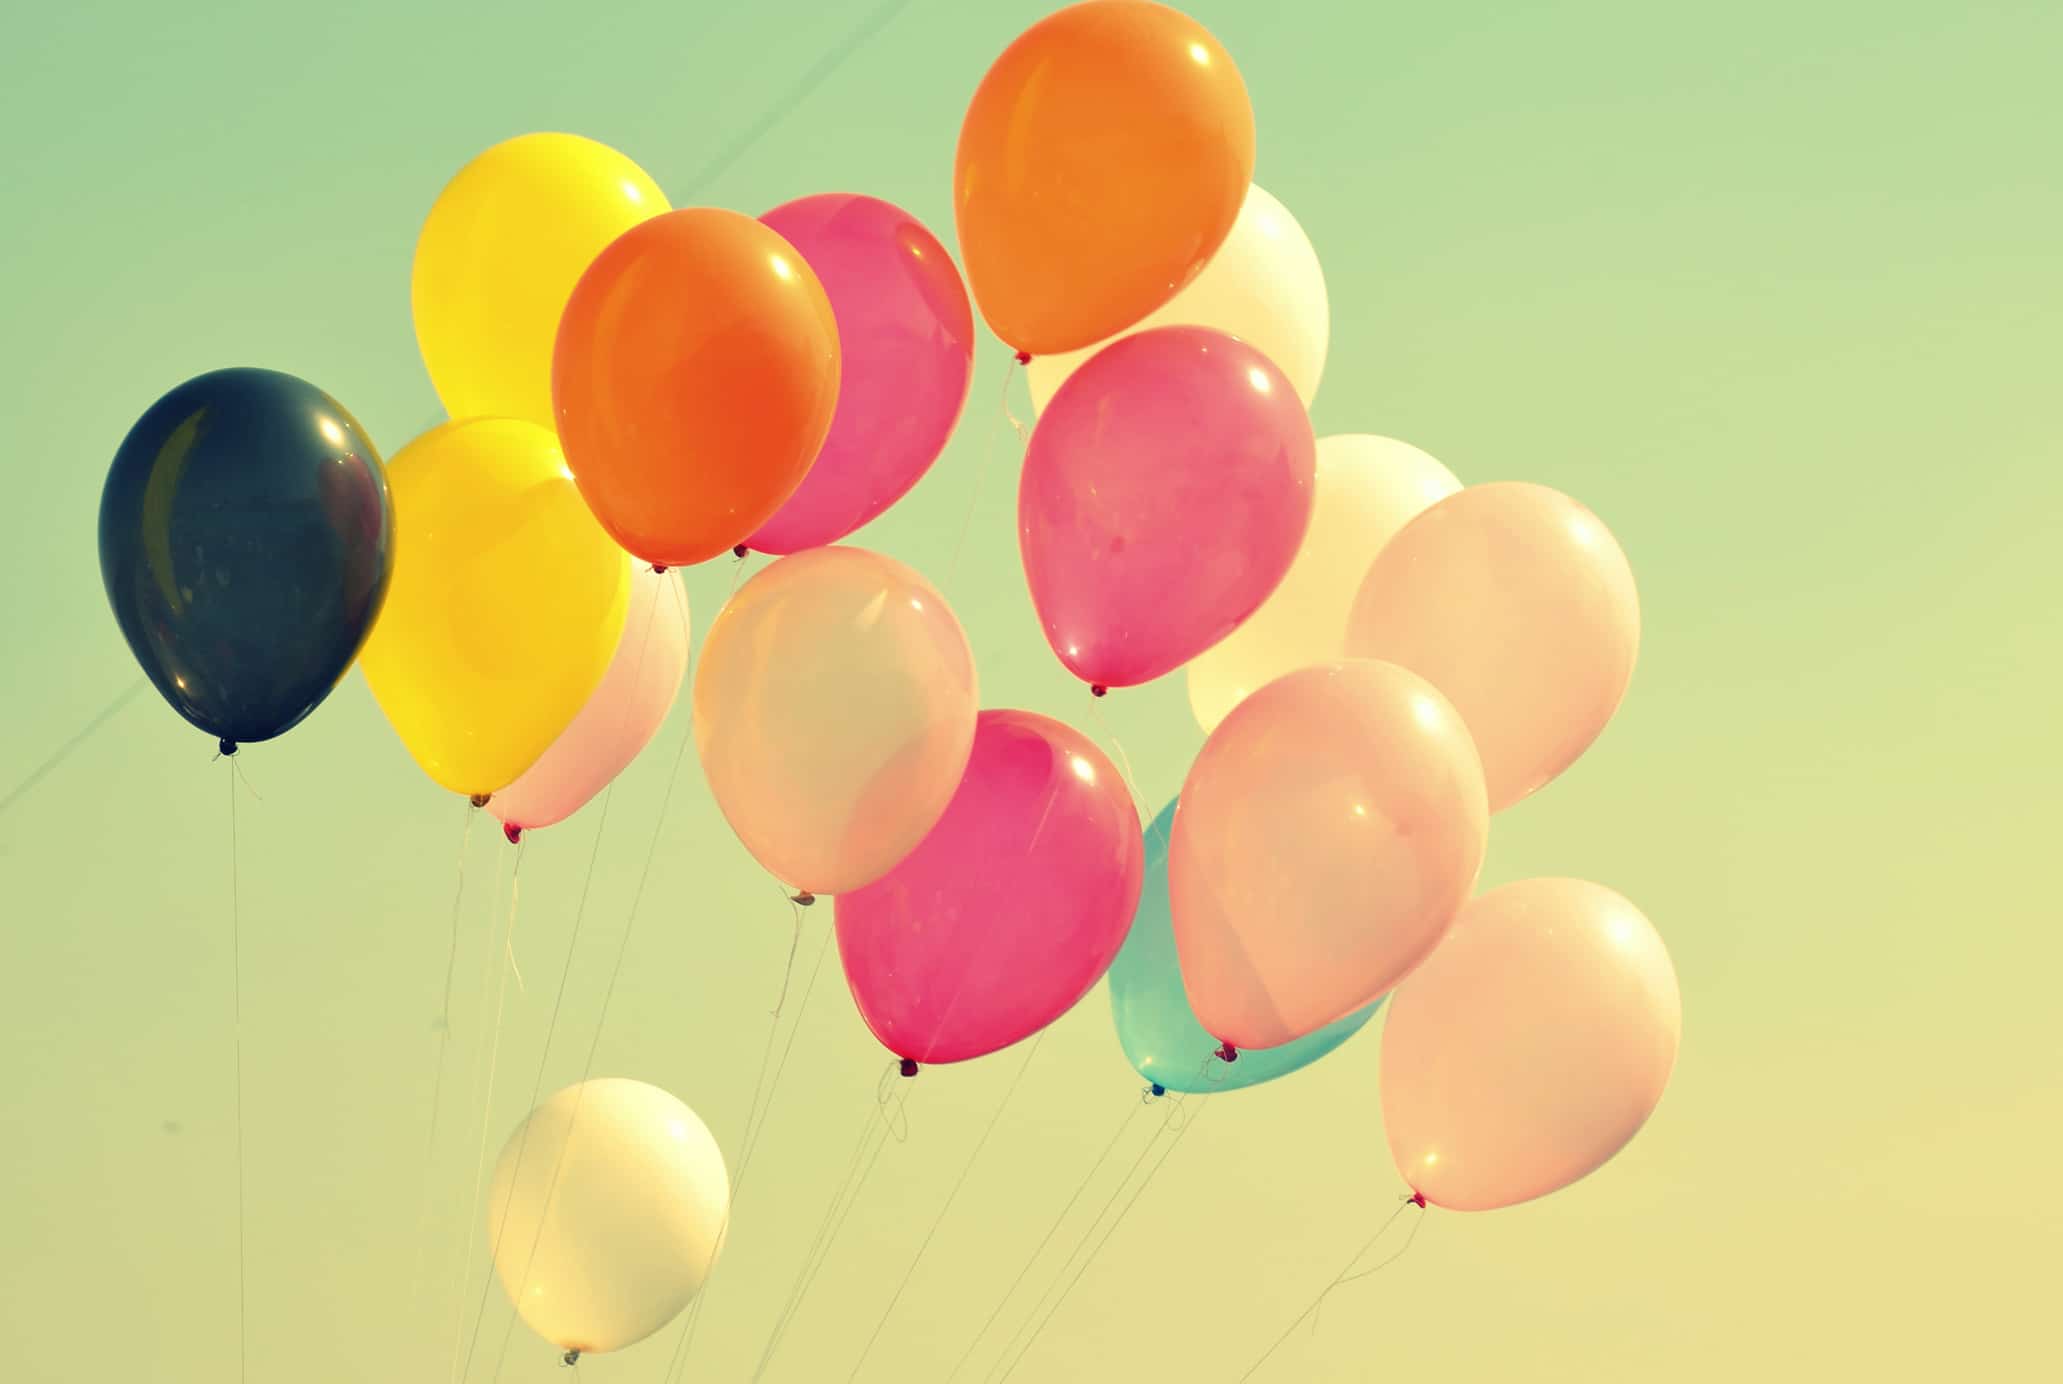 5 Important Things Every Web Designer Needs to Know || Balloons Being Released in the Air